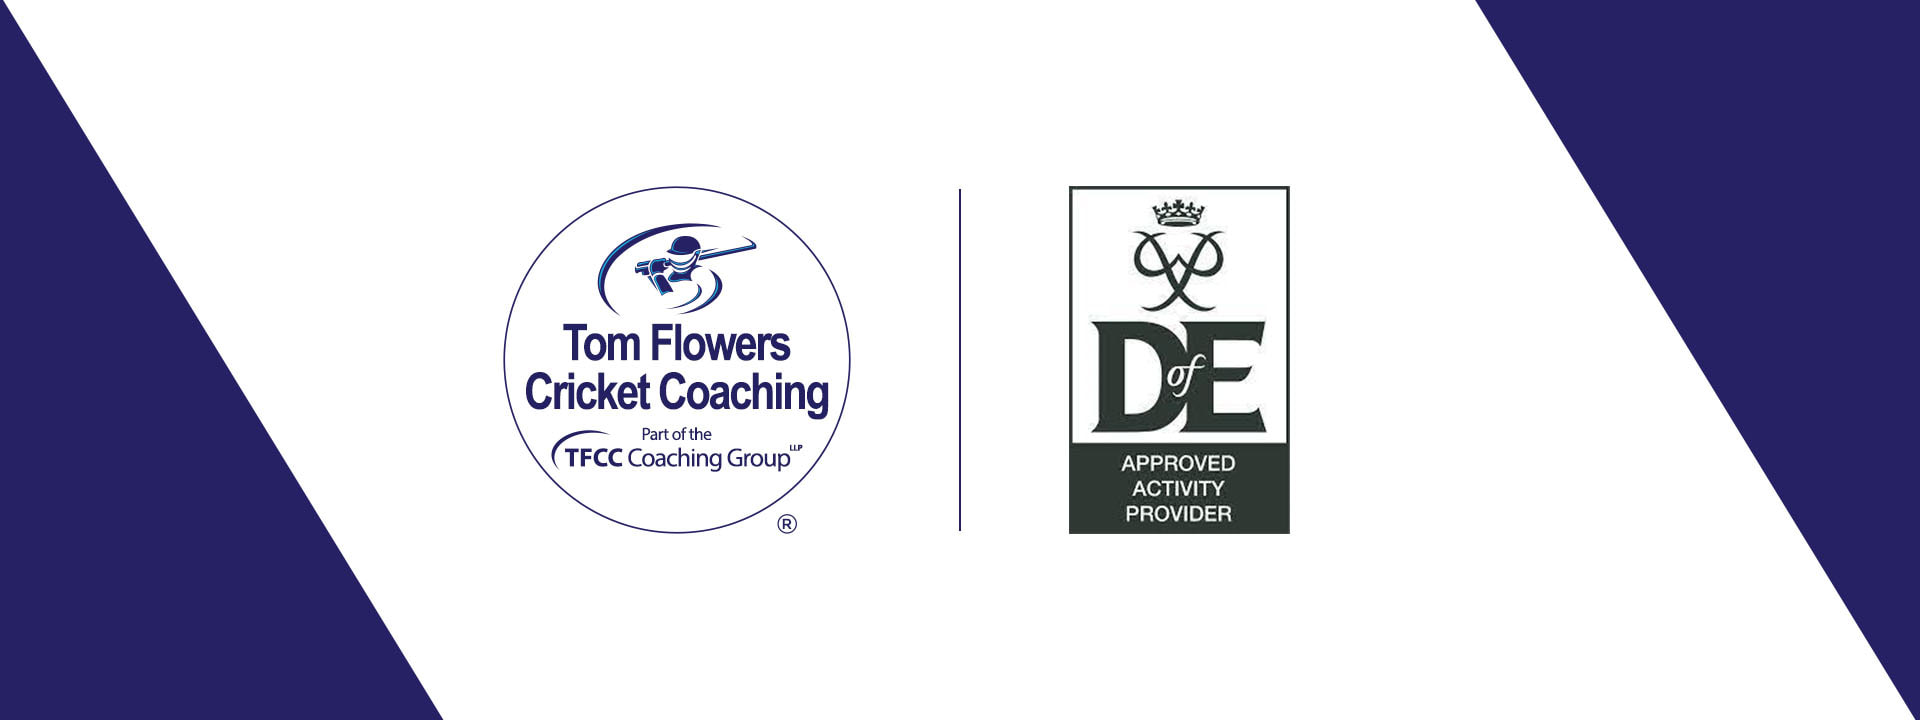 TFCC are now D of E Approved Activity Provider